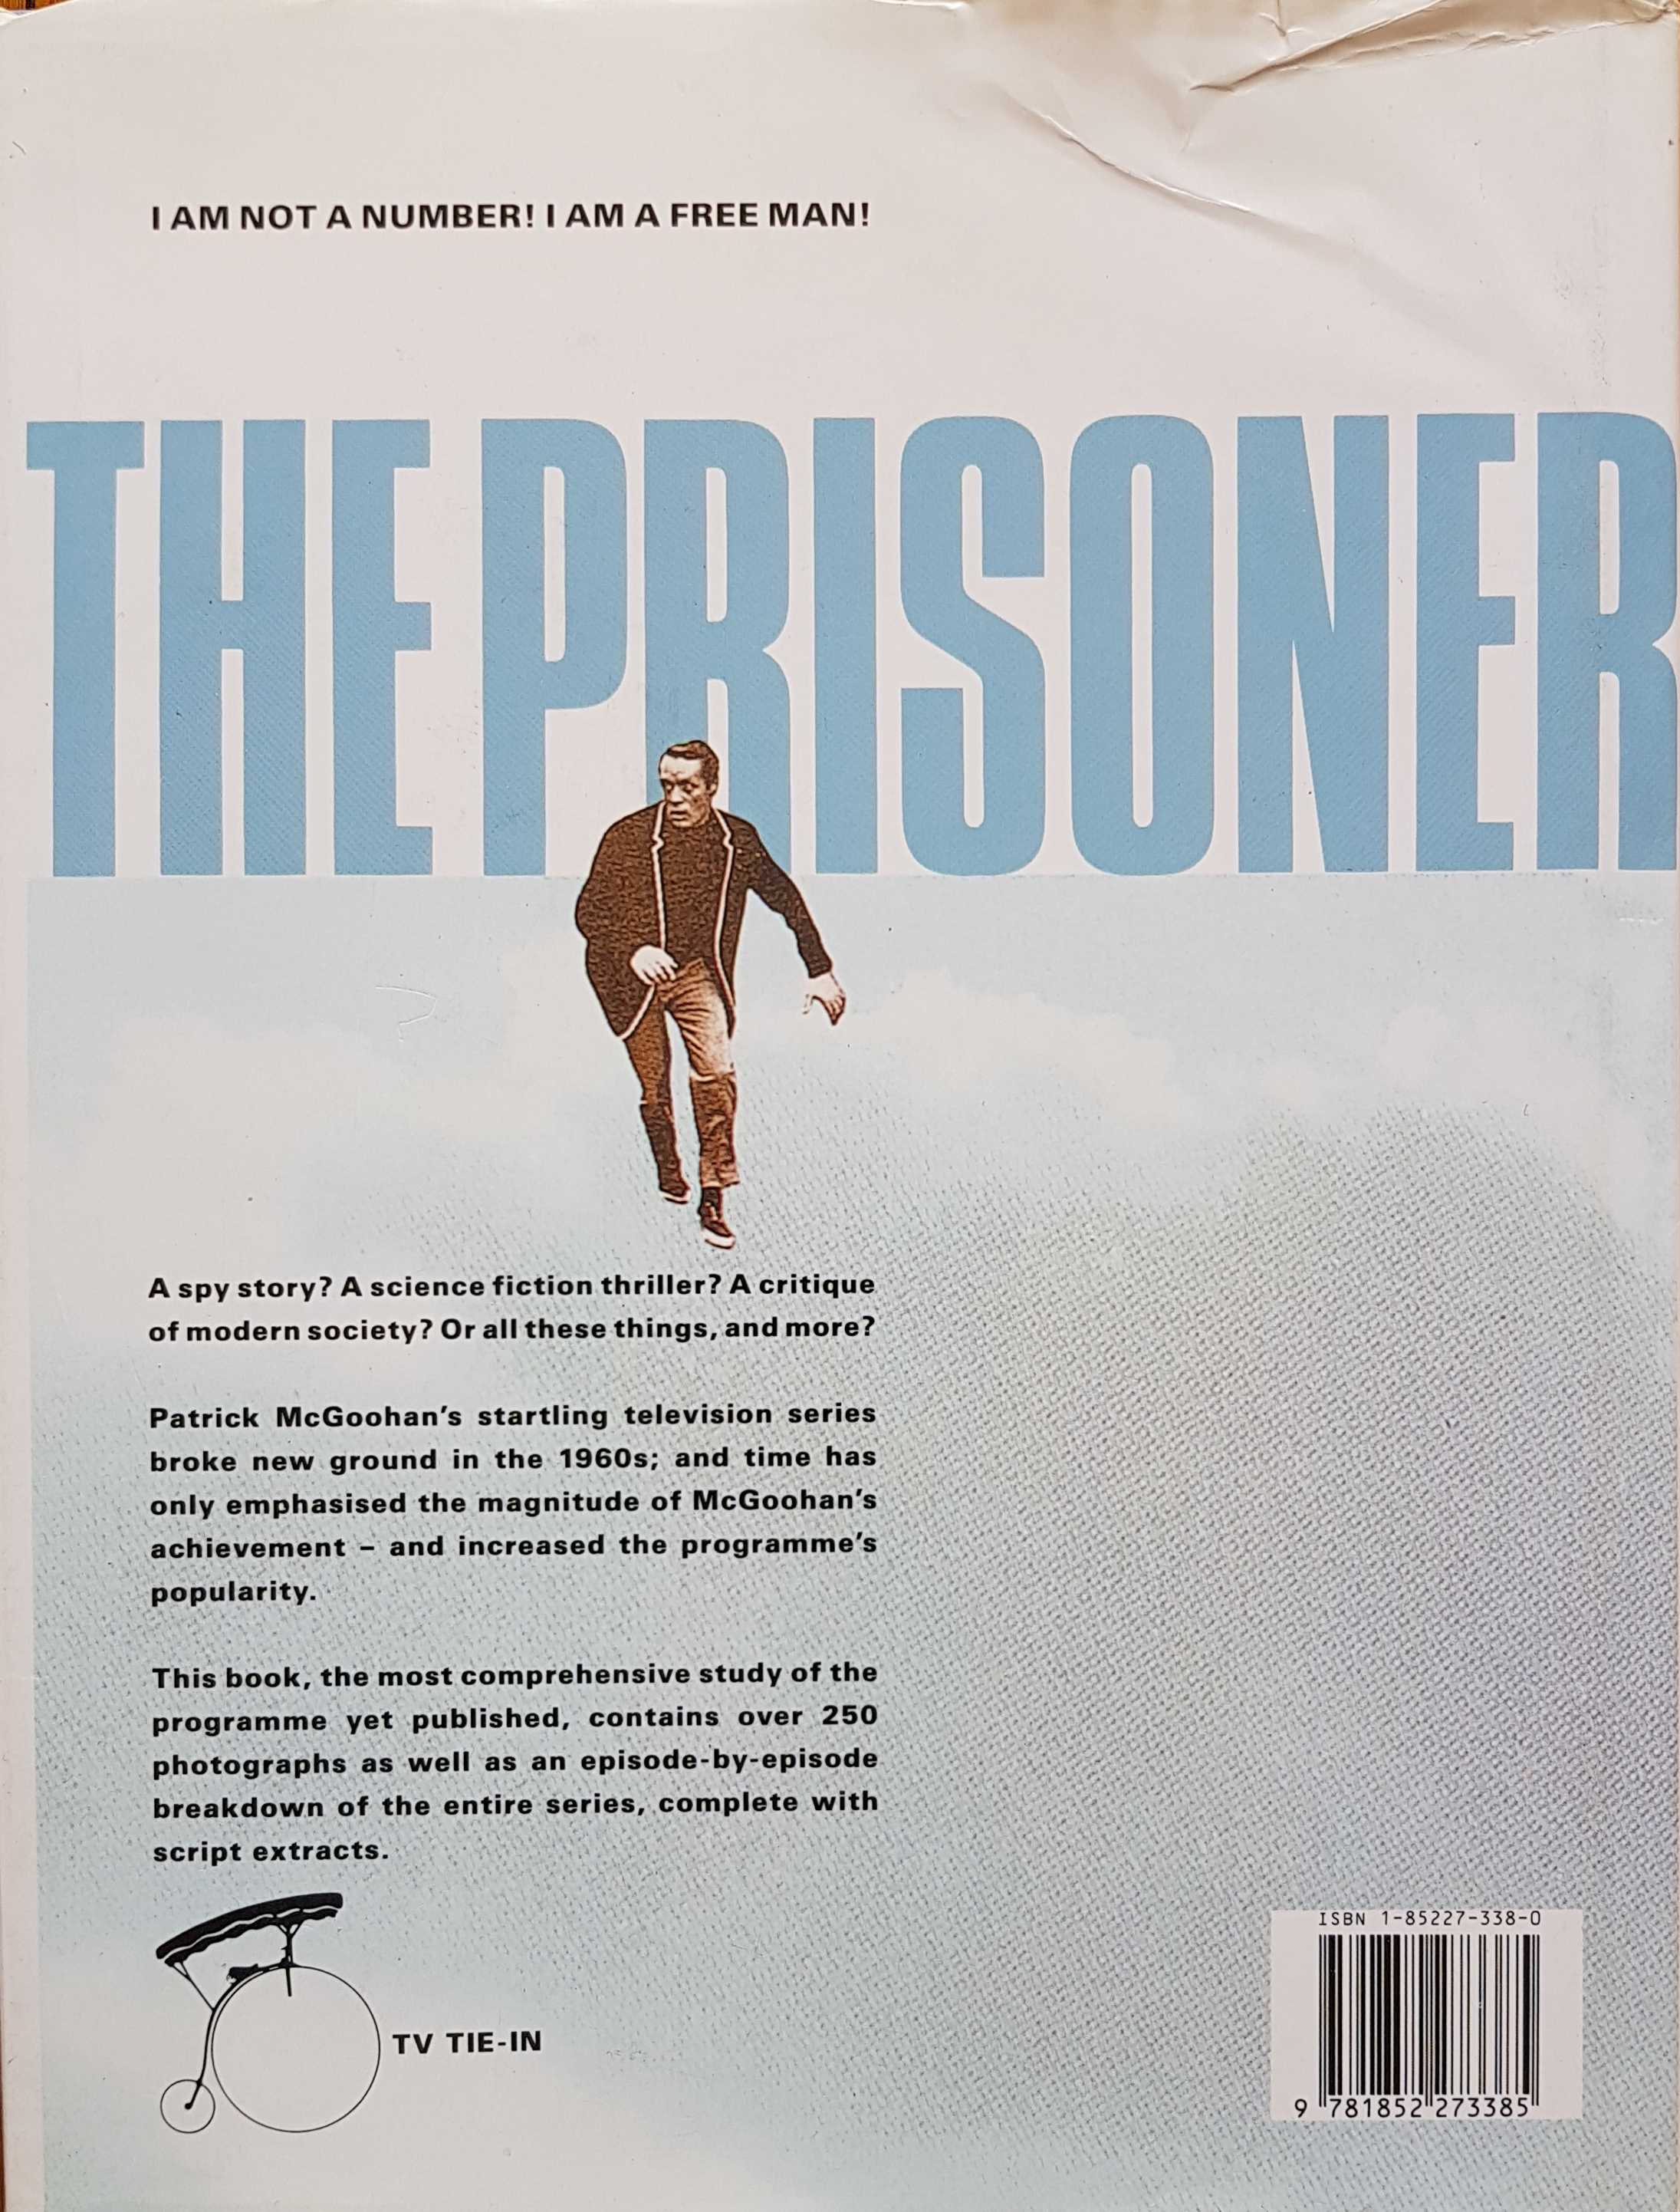 Picture of 1-85227-338-0 The prisoner by artist Alain Carraze / Helene Oswald from ITV, Channel 4 and Channel 5 library